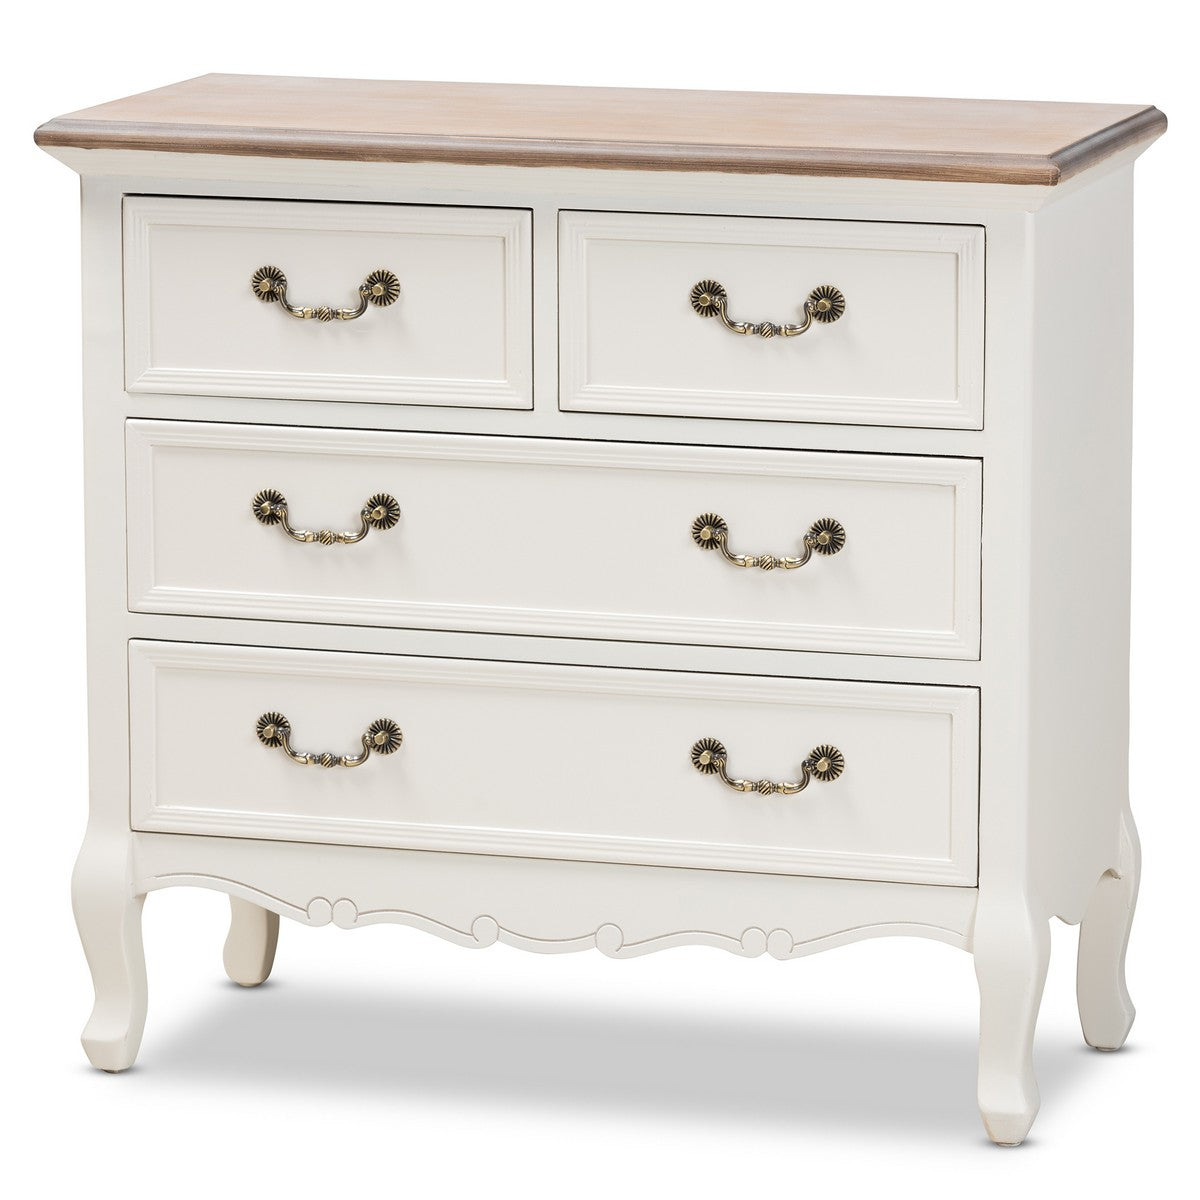 Baxton Studio Amalie Antique French Country Cottage Two-Tone White and Oak Finished 4-Drawer Accent Dresser Baxton Studio- Dressers-Minimal And Modern - 1